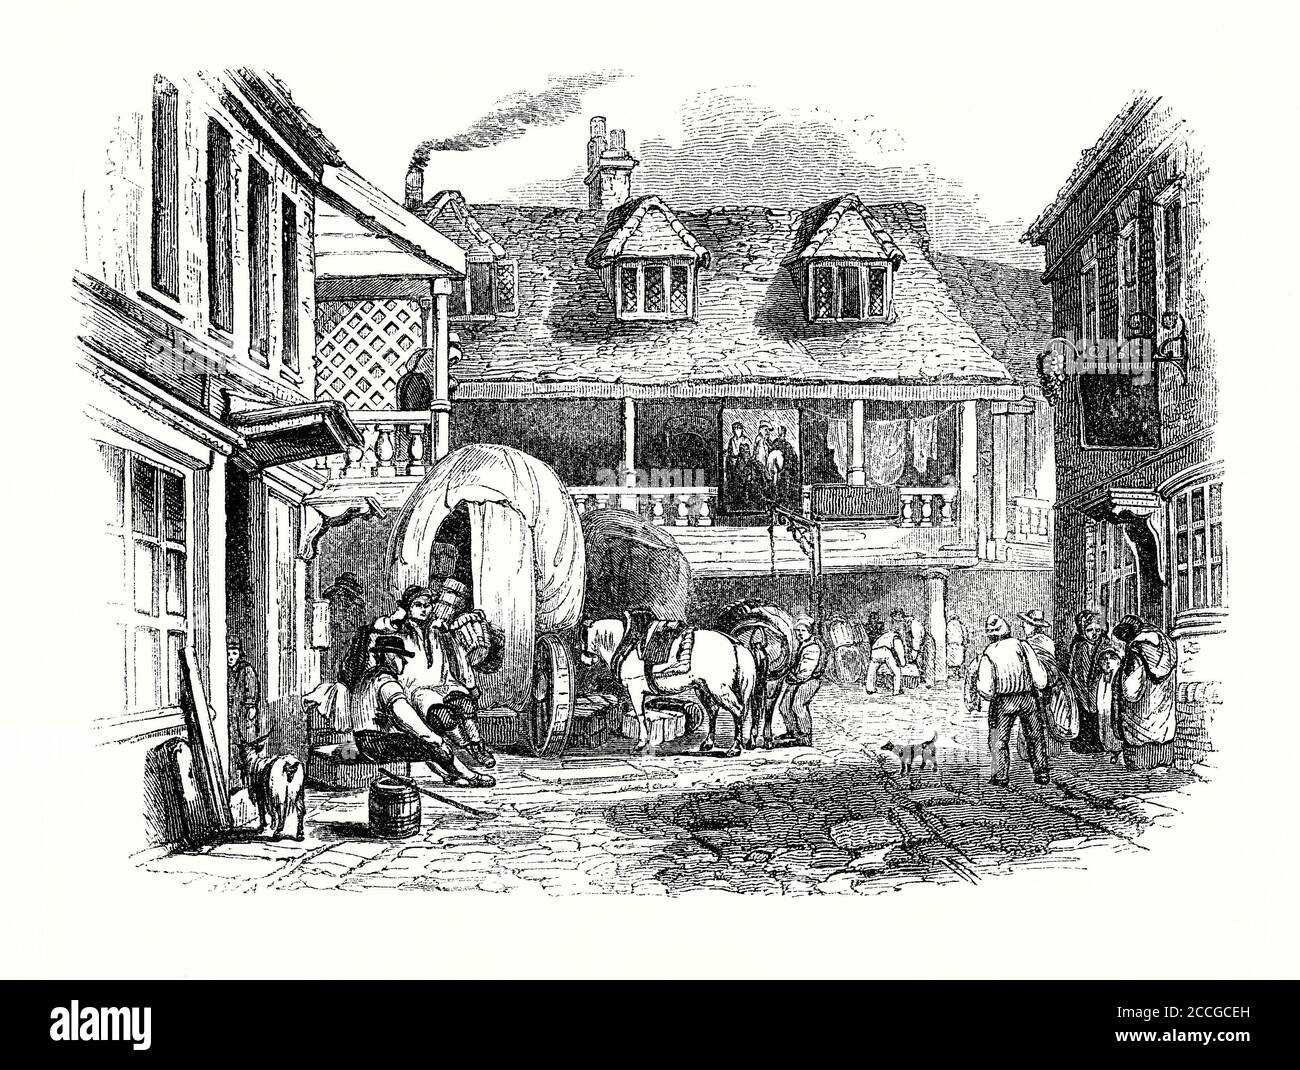 An old engraving of 'The Tabard' (or ‘Talbot’) in the late 1700s. Bedding is aired upstairs. Goods are loaded onto waggons. The inn stood in Borough High St, Southwark, London, England, UK. It was established in 1307 and was on the coach route south from London. The Tabard accommodated people who made the pilgrimage to Canterbury Cathedral (Chaucer mentions it in 'The Canterbury Tales'). In 1676 fire destroyed the inn. It was rebuilt and renamed The Talbot. It profited from the growth in stagecoach traffic between London and the channel ports. It was demolished in 1873. Stock Photo